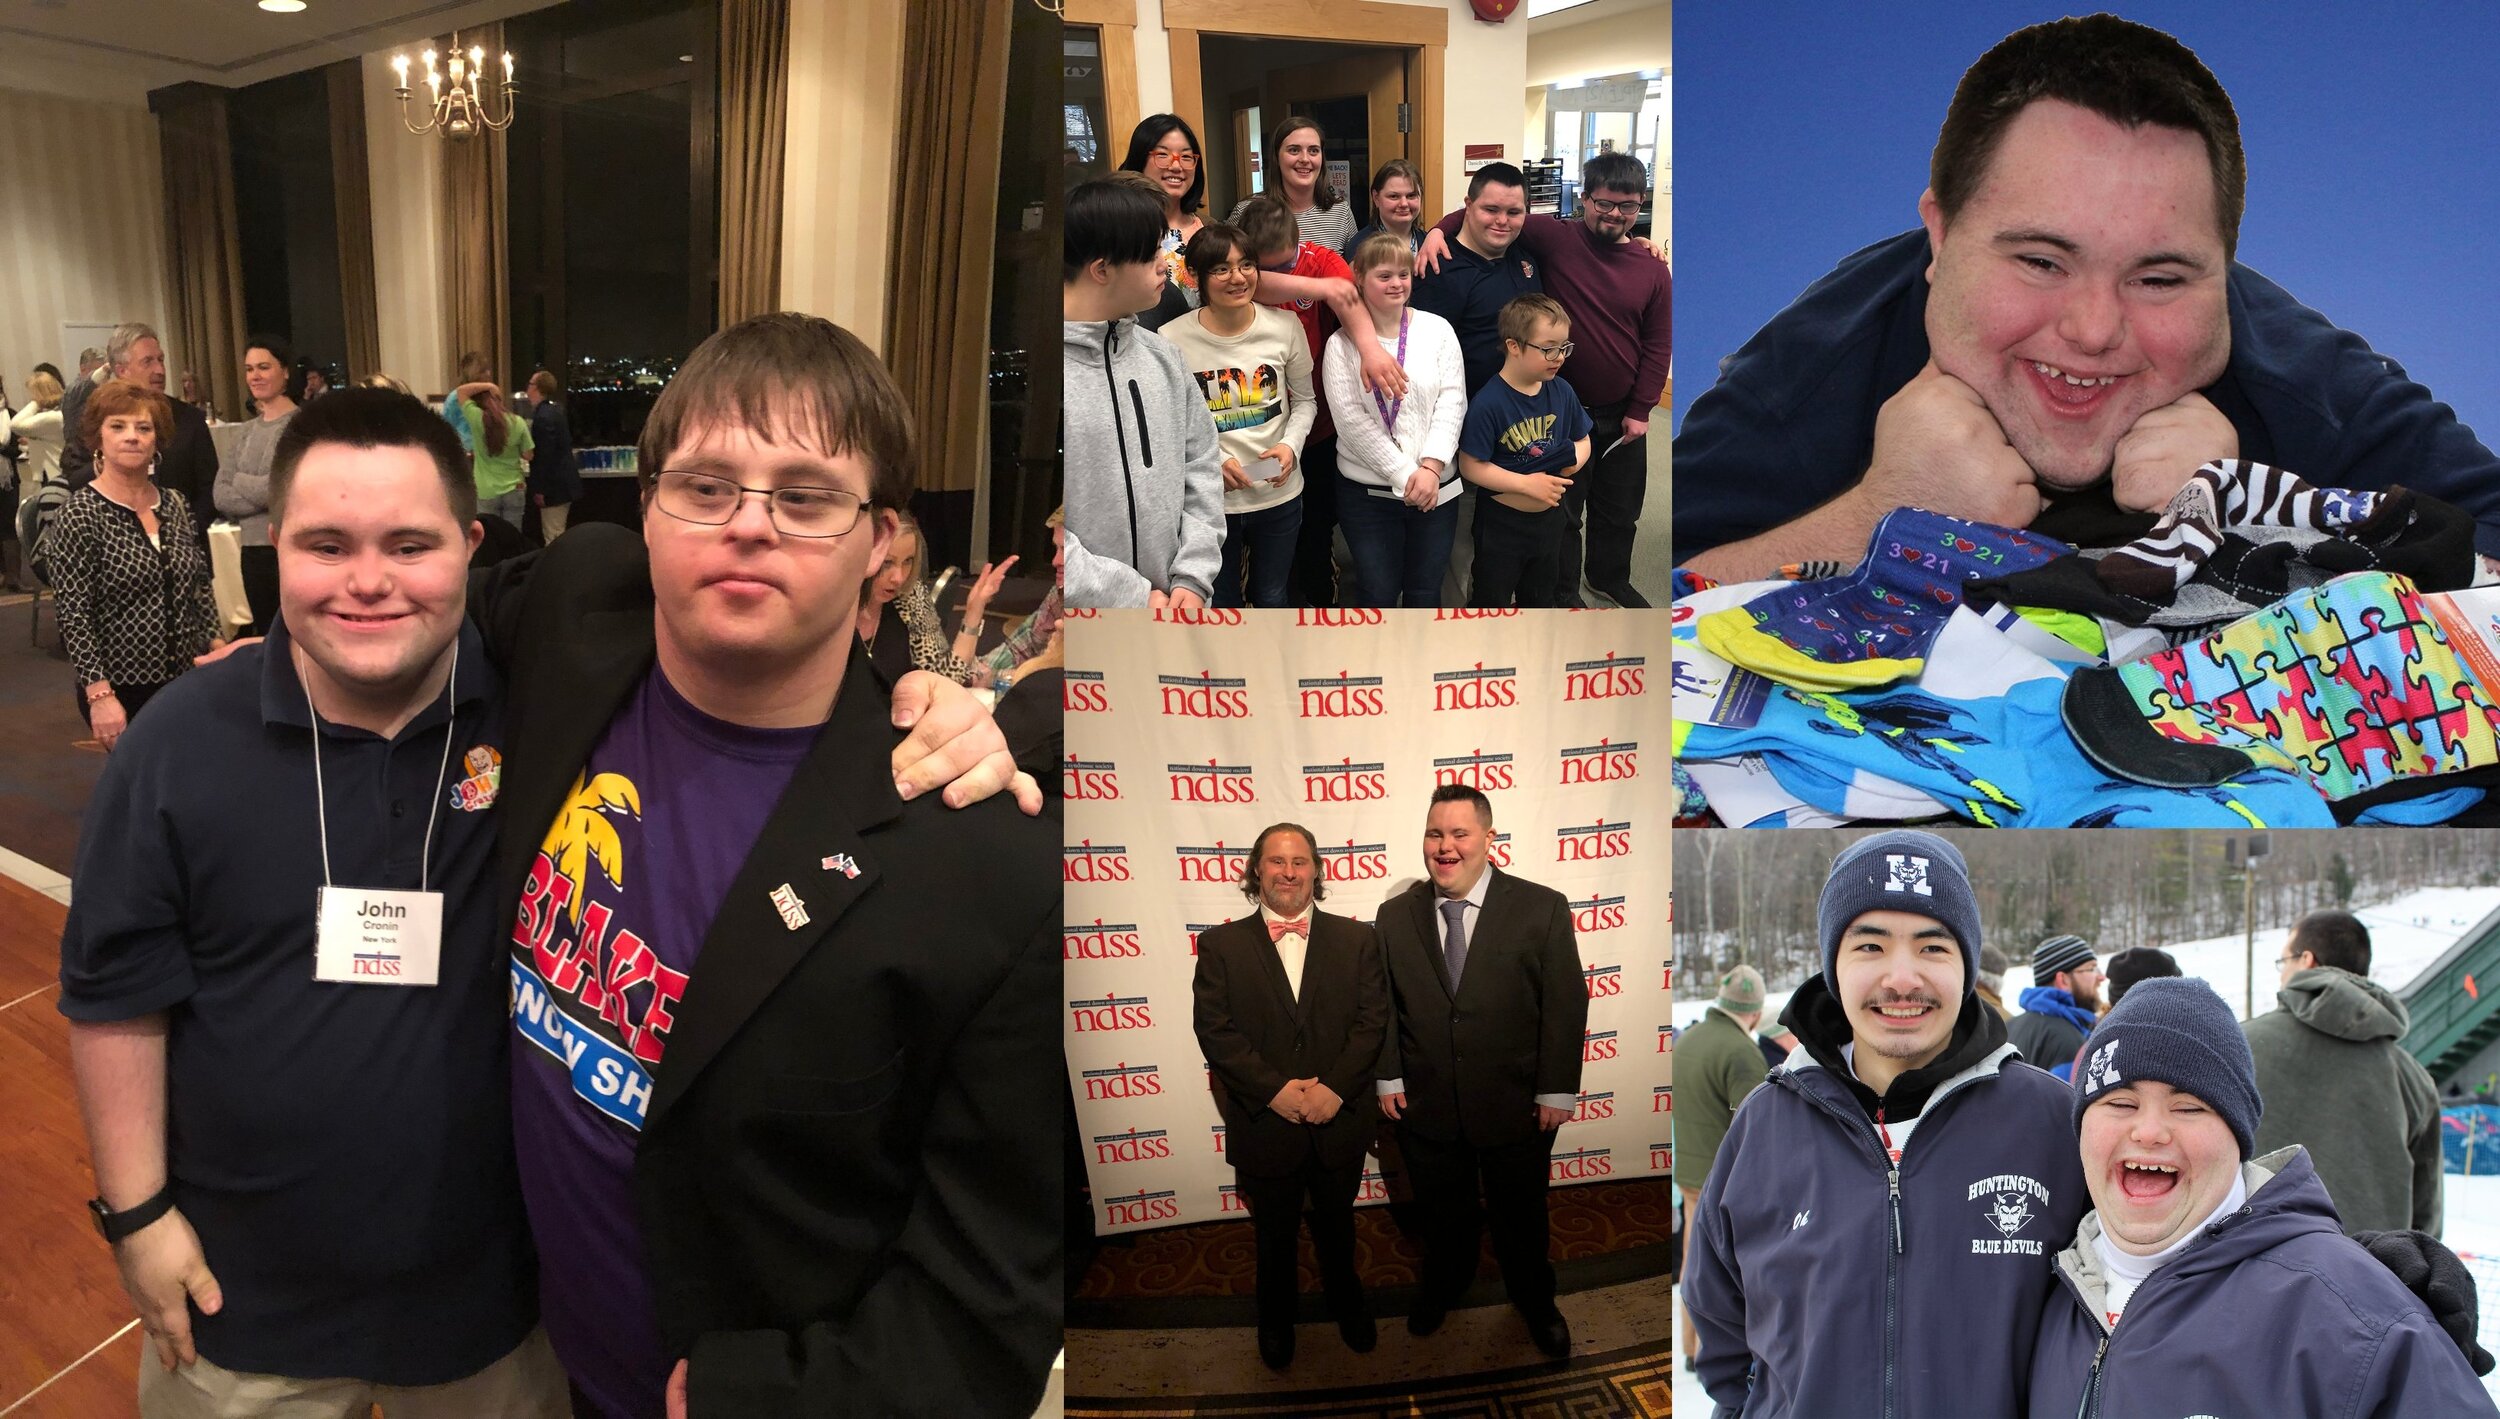 Focus On: John Cronin and Mark Cronin of John's Crazy Socks, Long Island sock company founded by young man with Down syndrome and father, spotlight on NY entrepreneur, special needs family, special needs business, father-son business